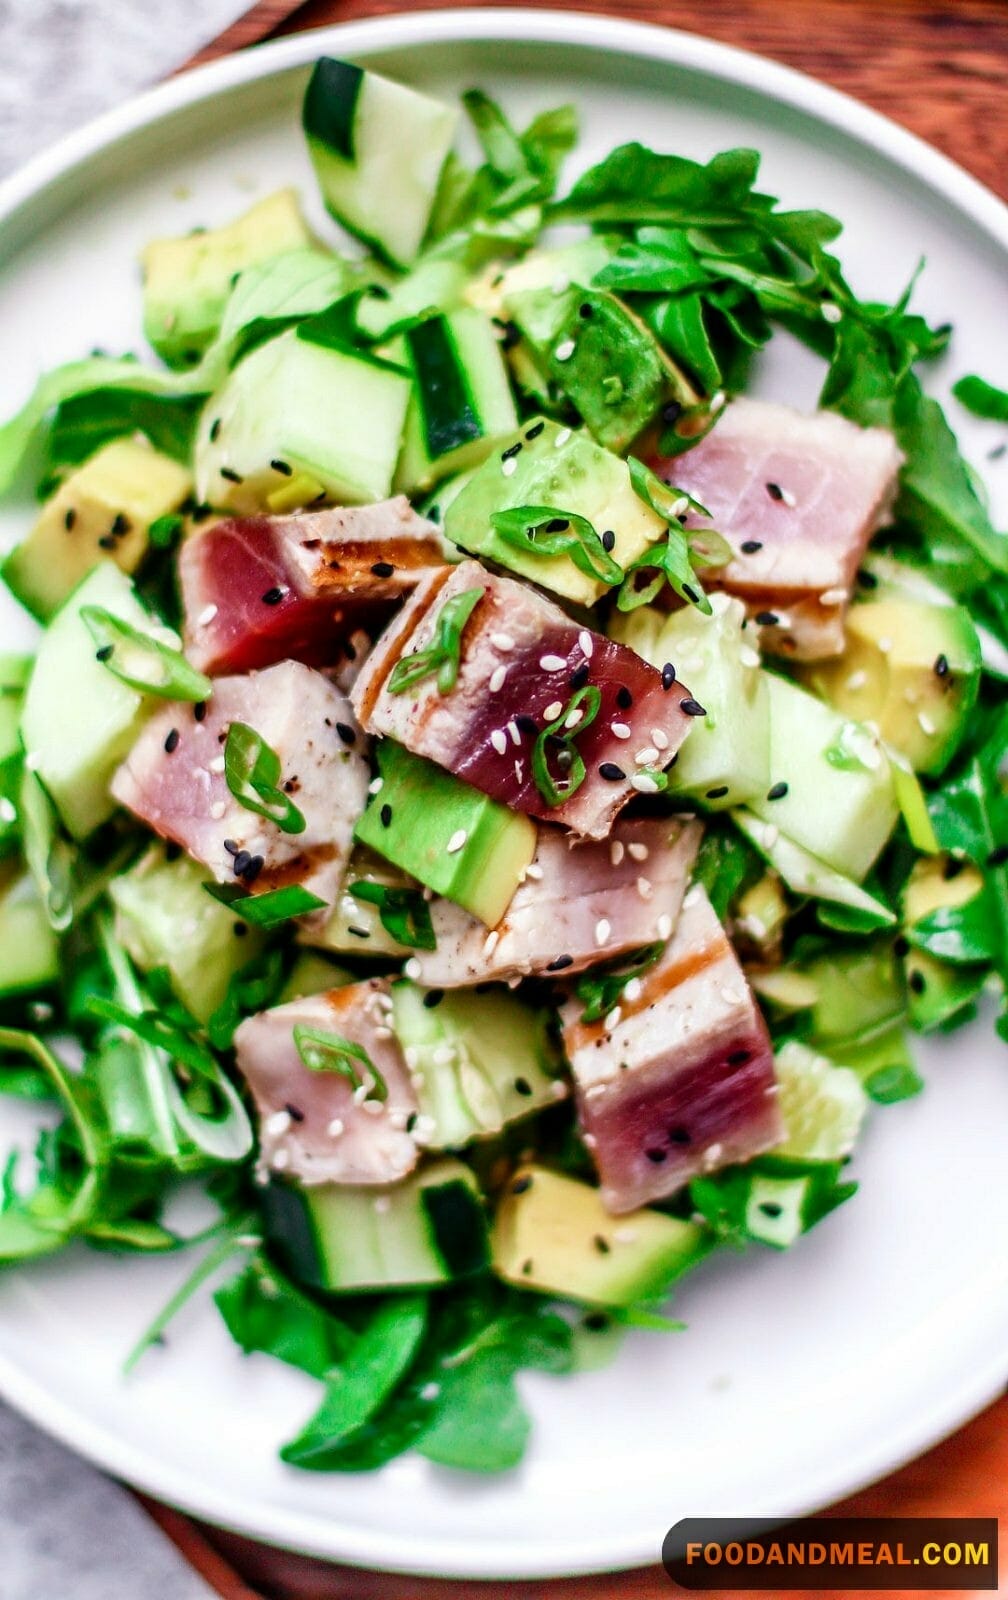  Grilled Tuna and Lettuce Salad